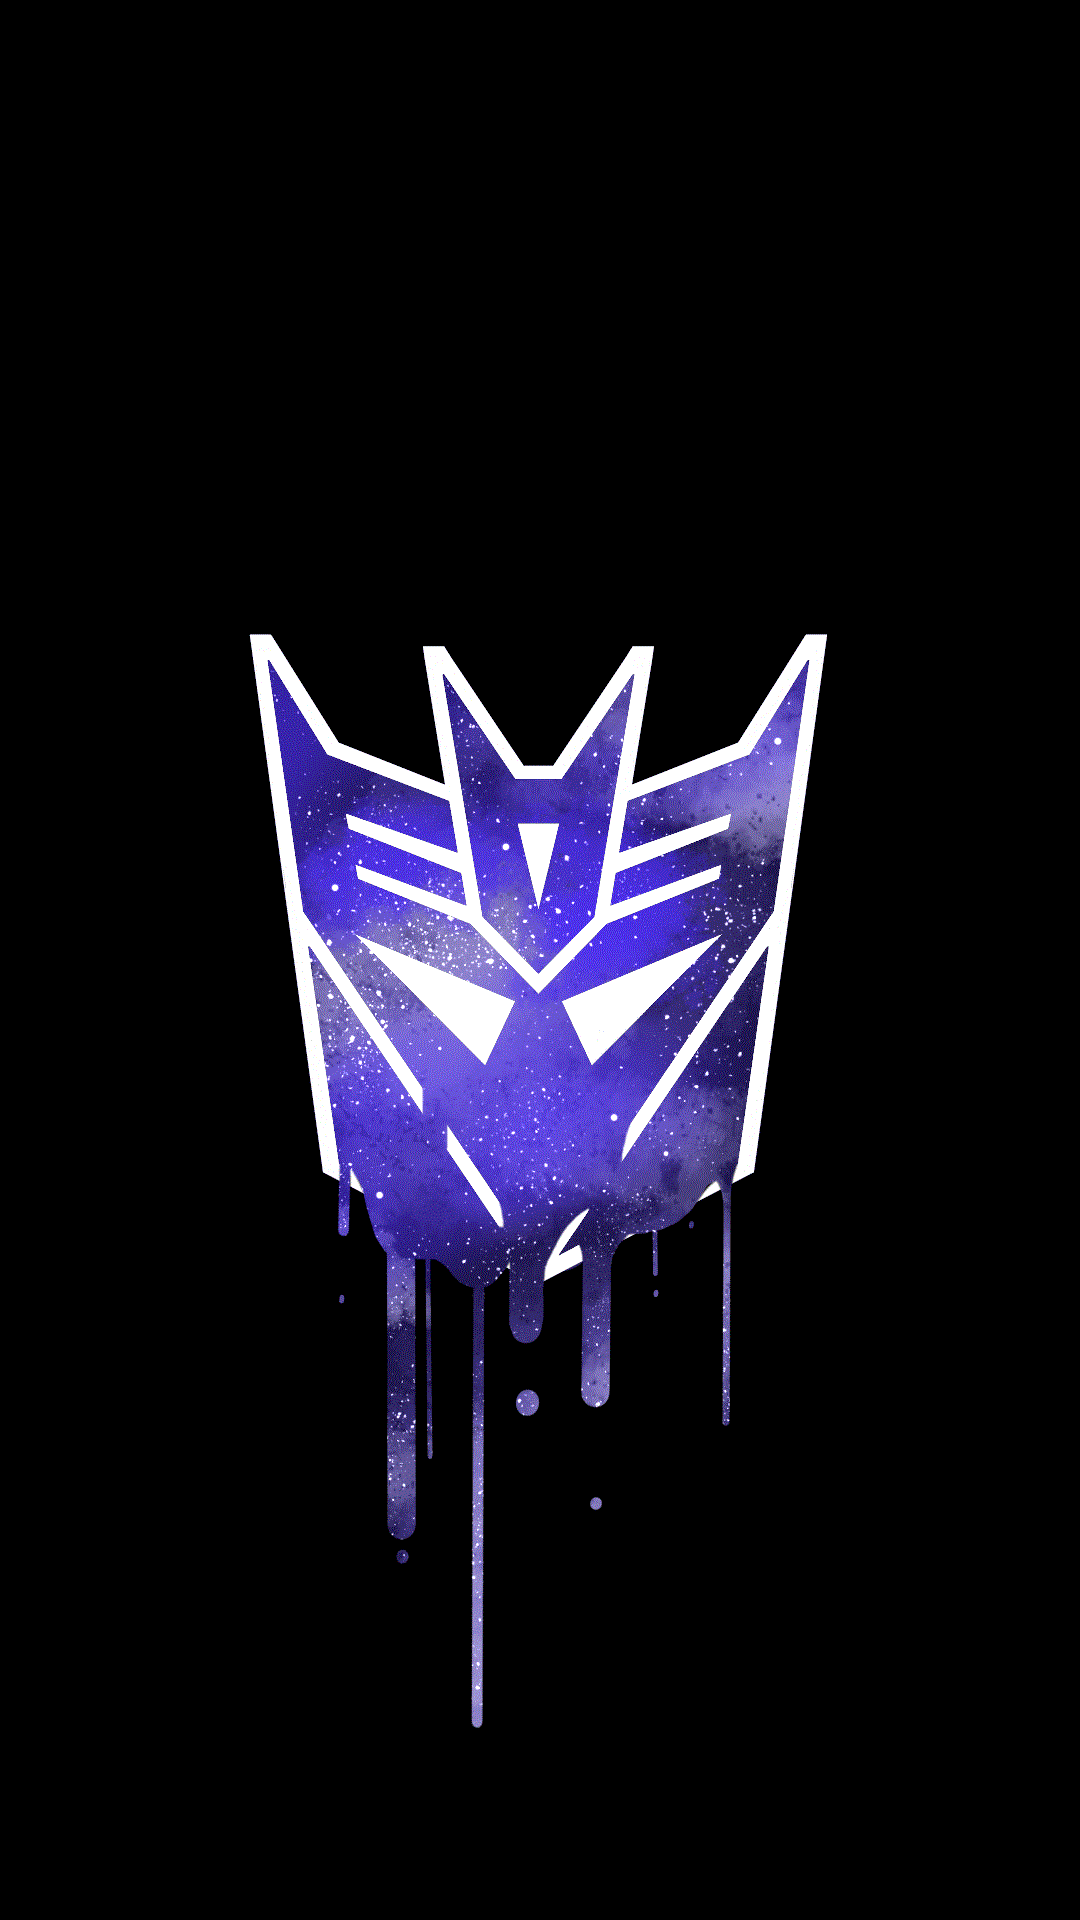 Decepticon Day wallpaper Ive always liked the cons more than the Autobots   rtransformers